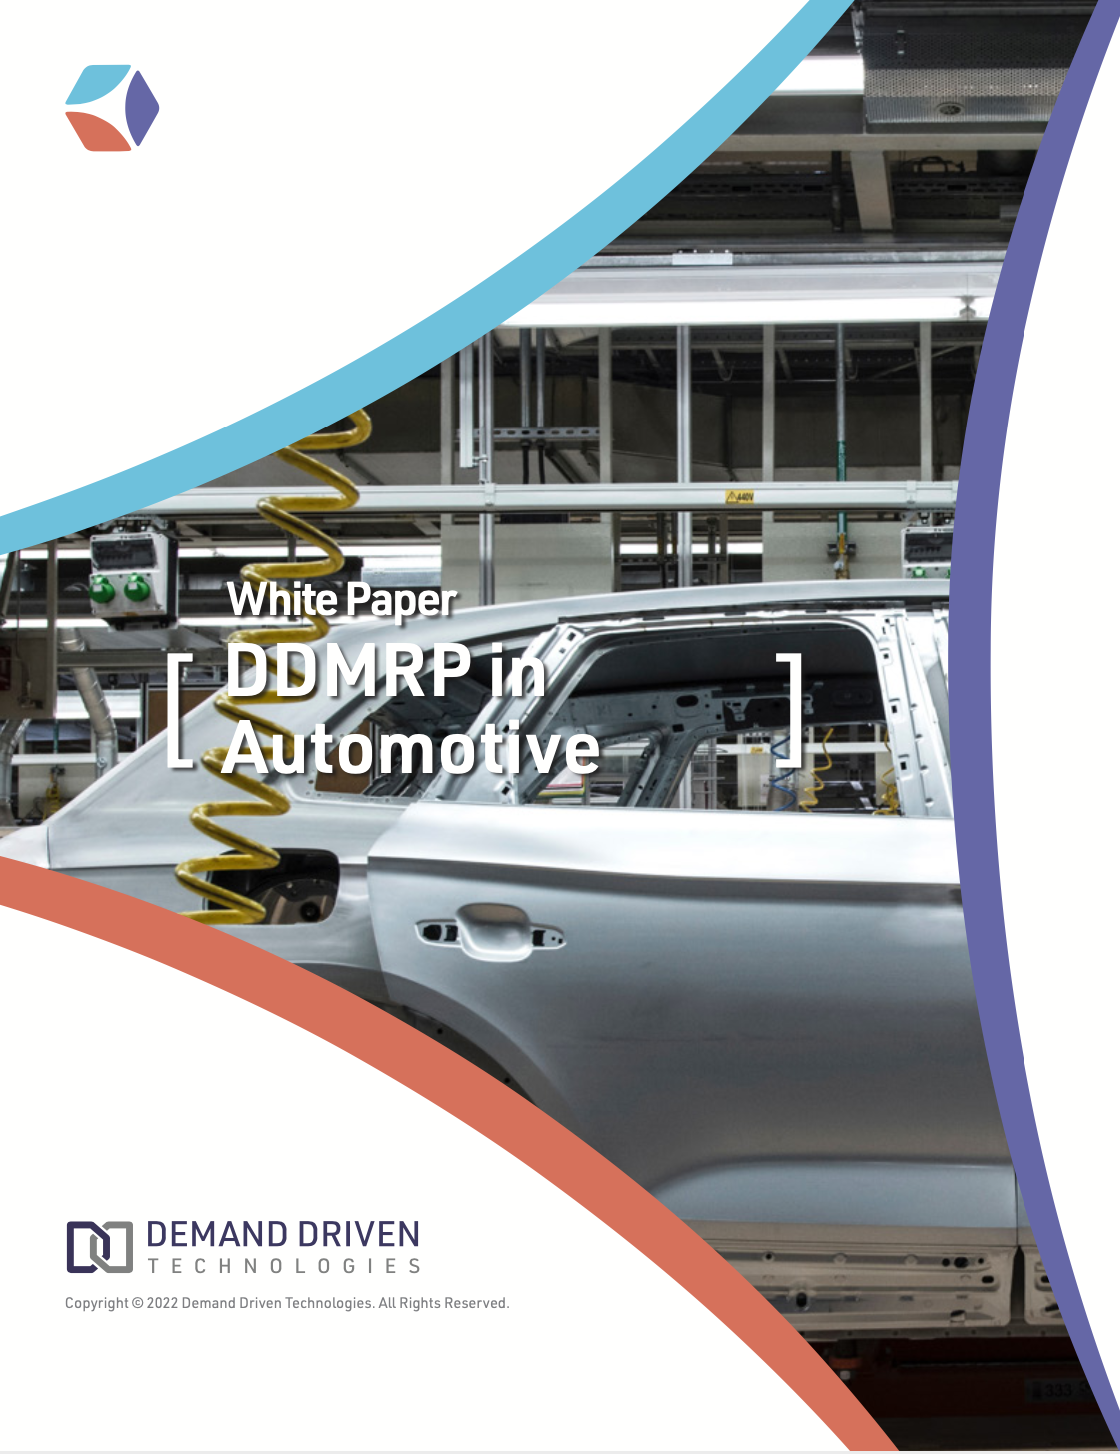 DDMRP in automotive white paper